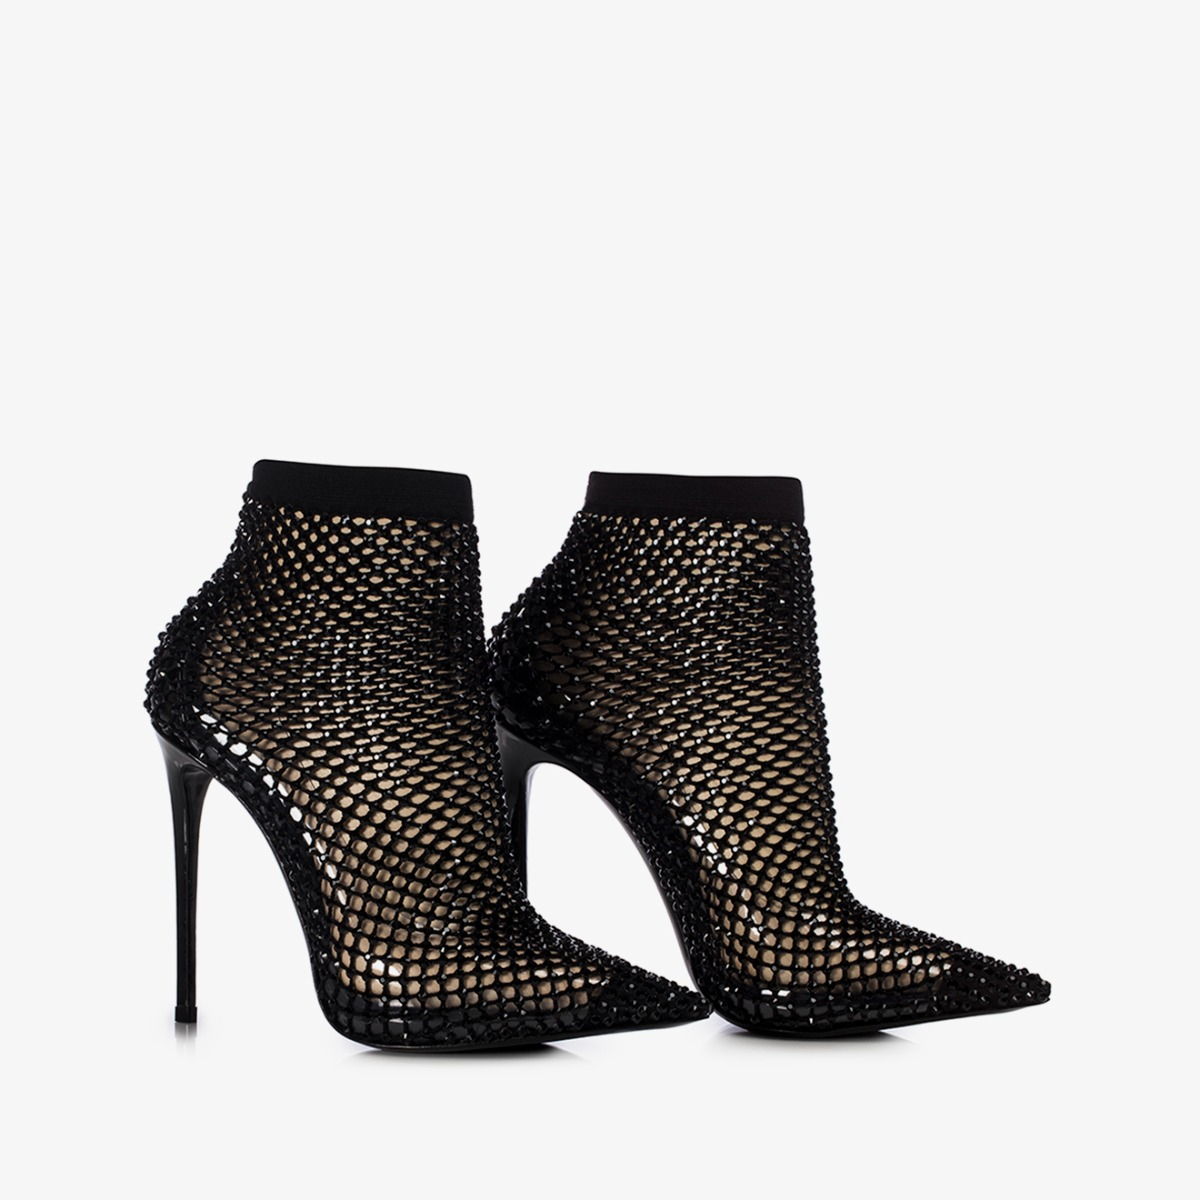 GILDA ANKLE BOOT 120 mm - Le Silla | Official Online Store